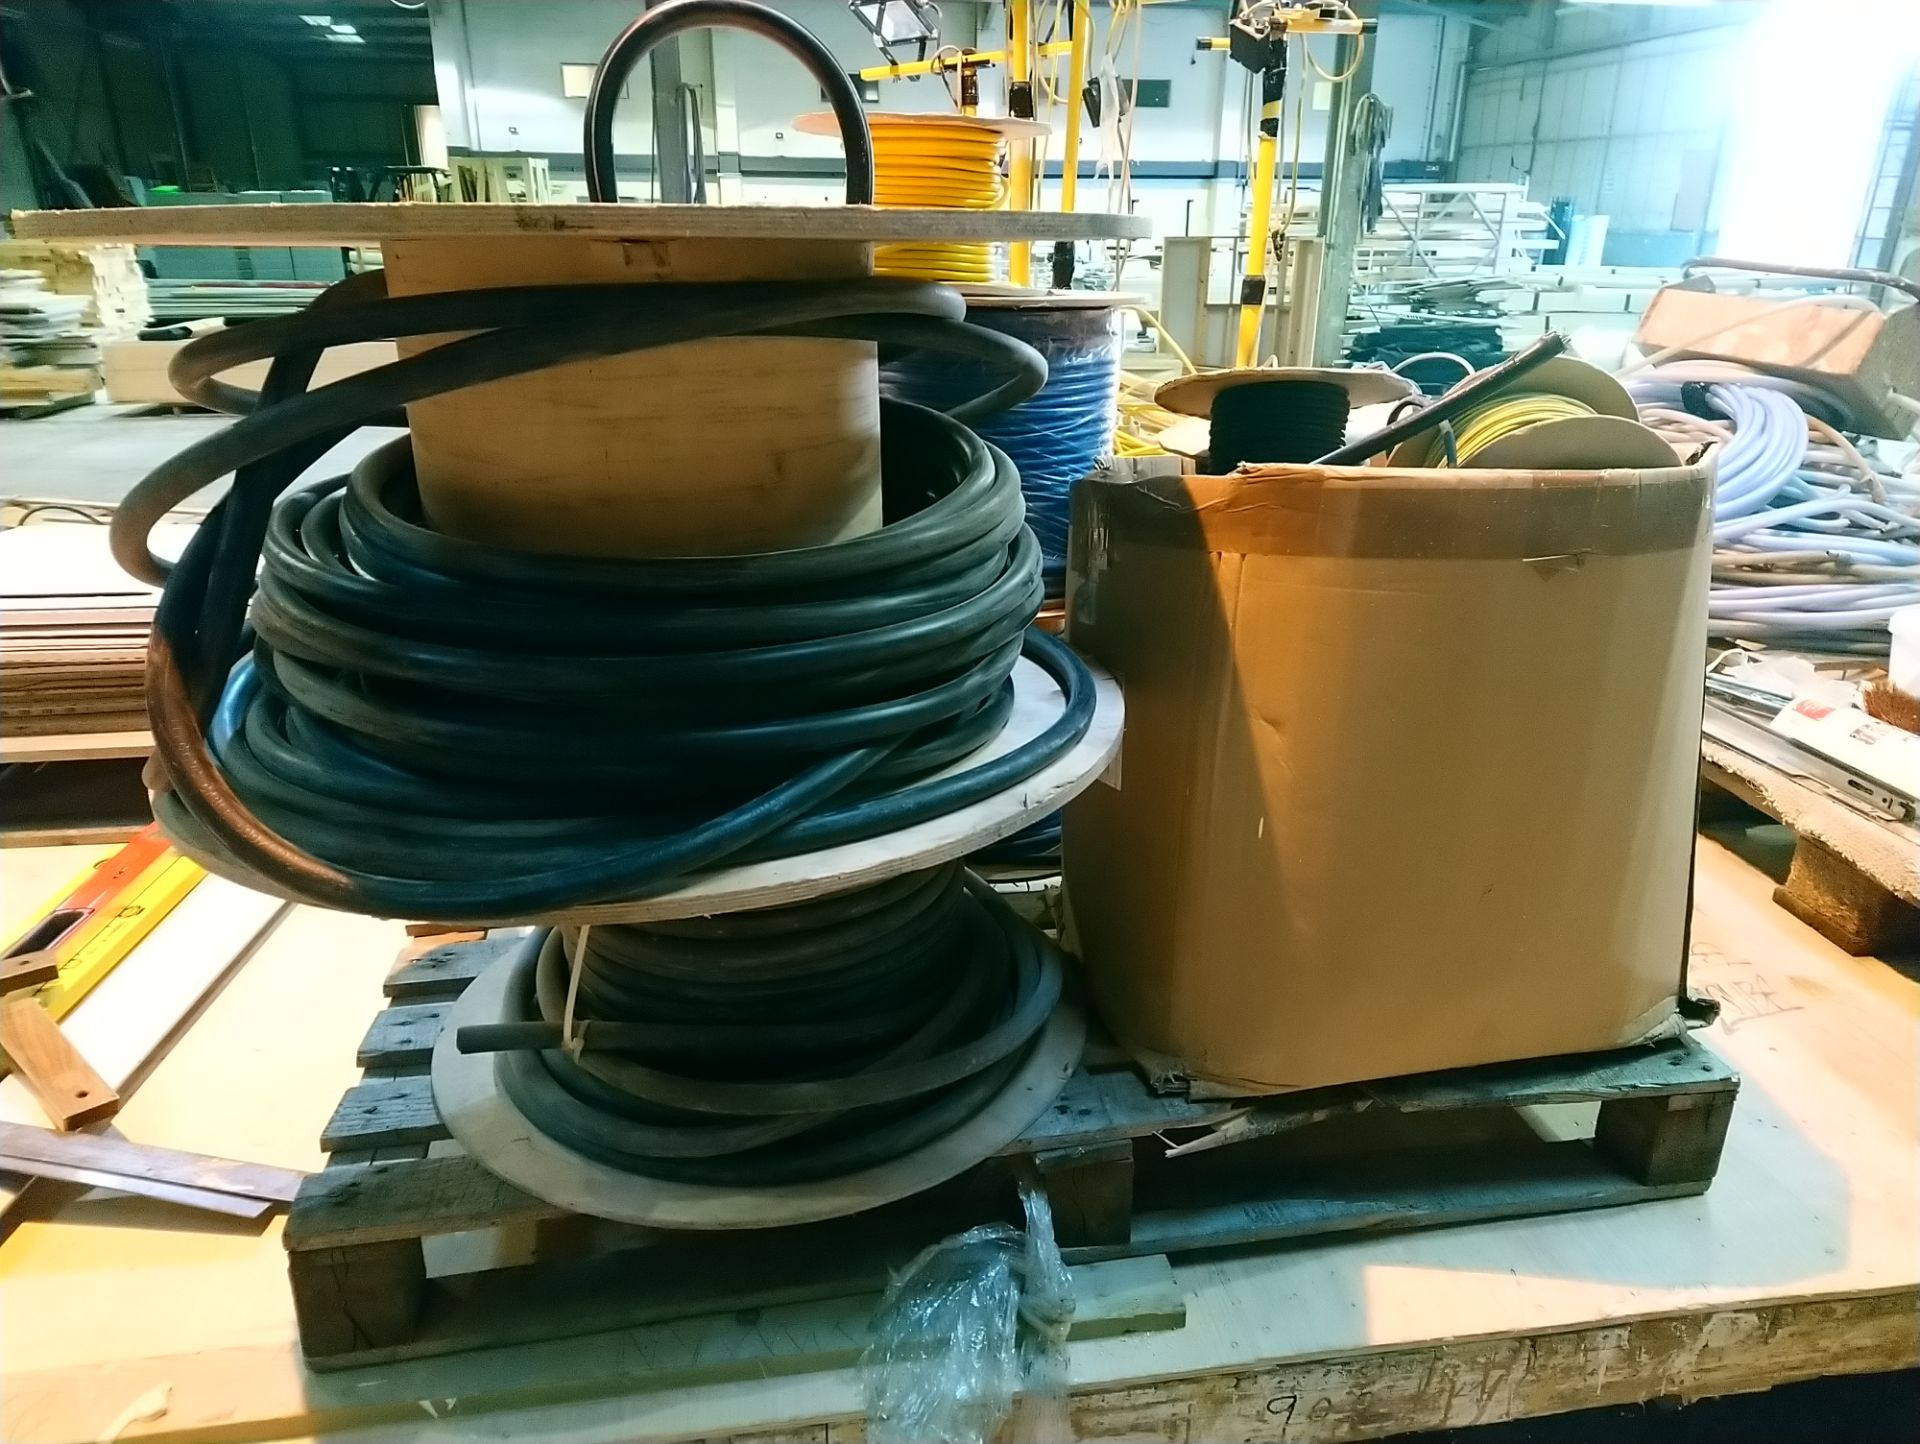 Reels of cable and hose